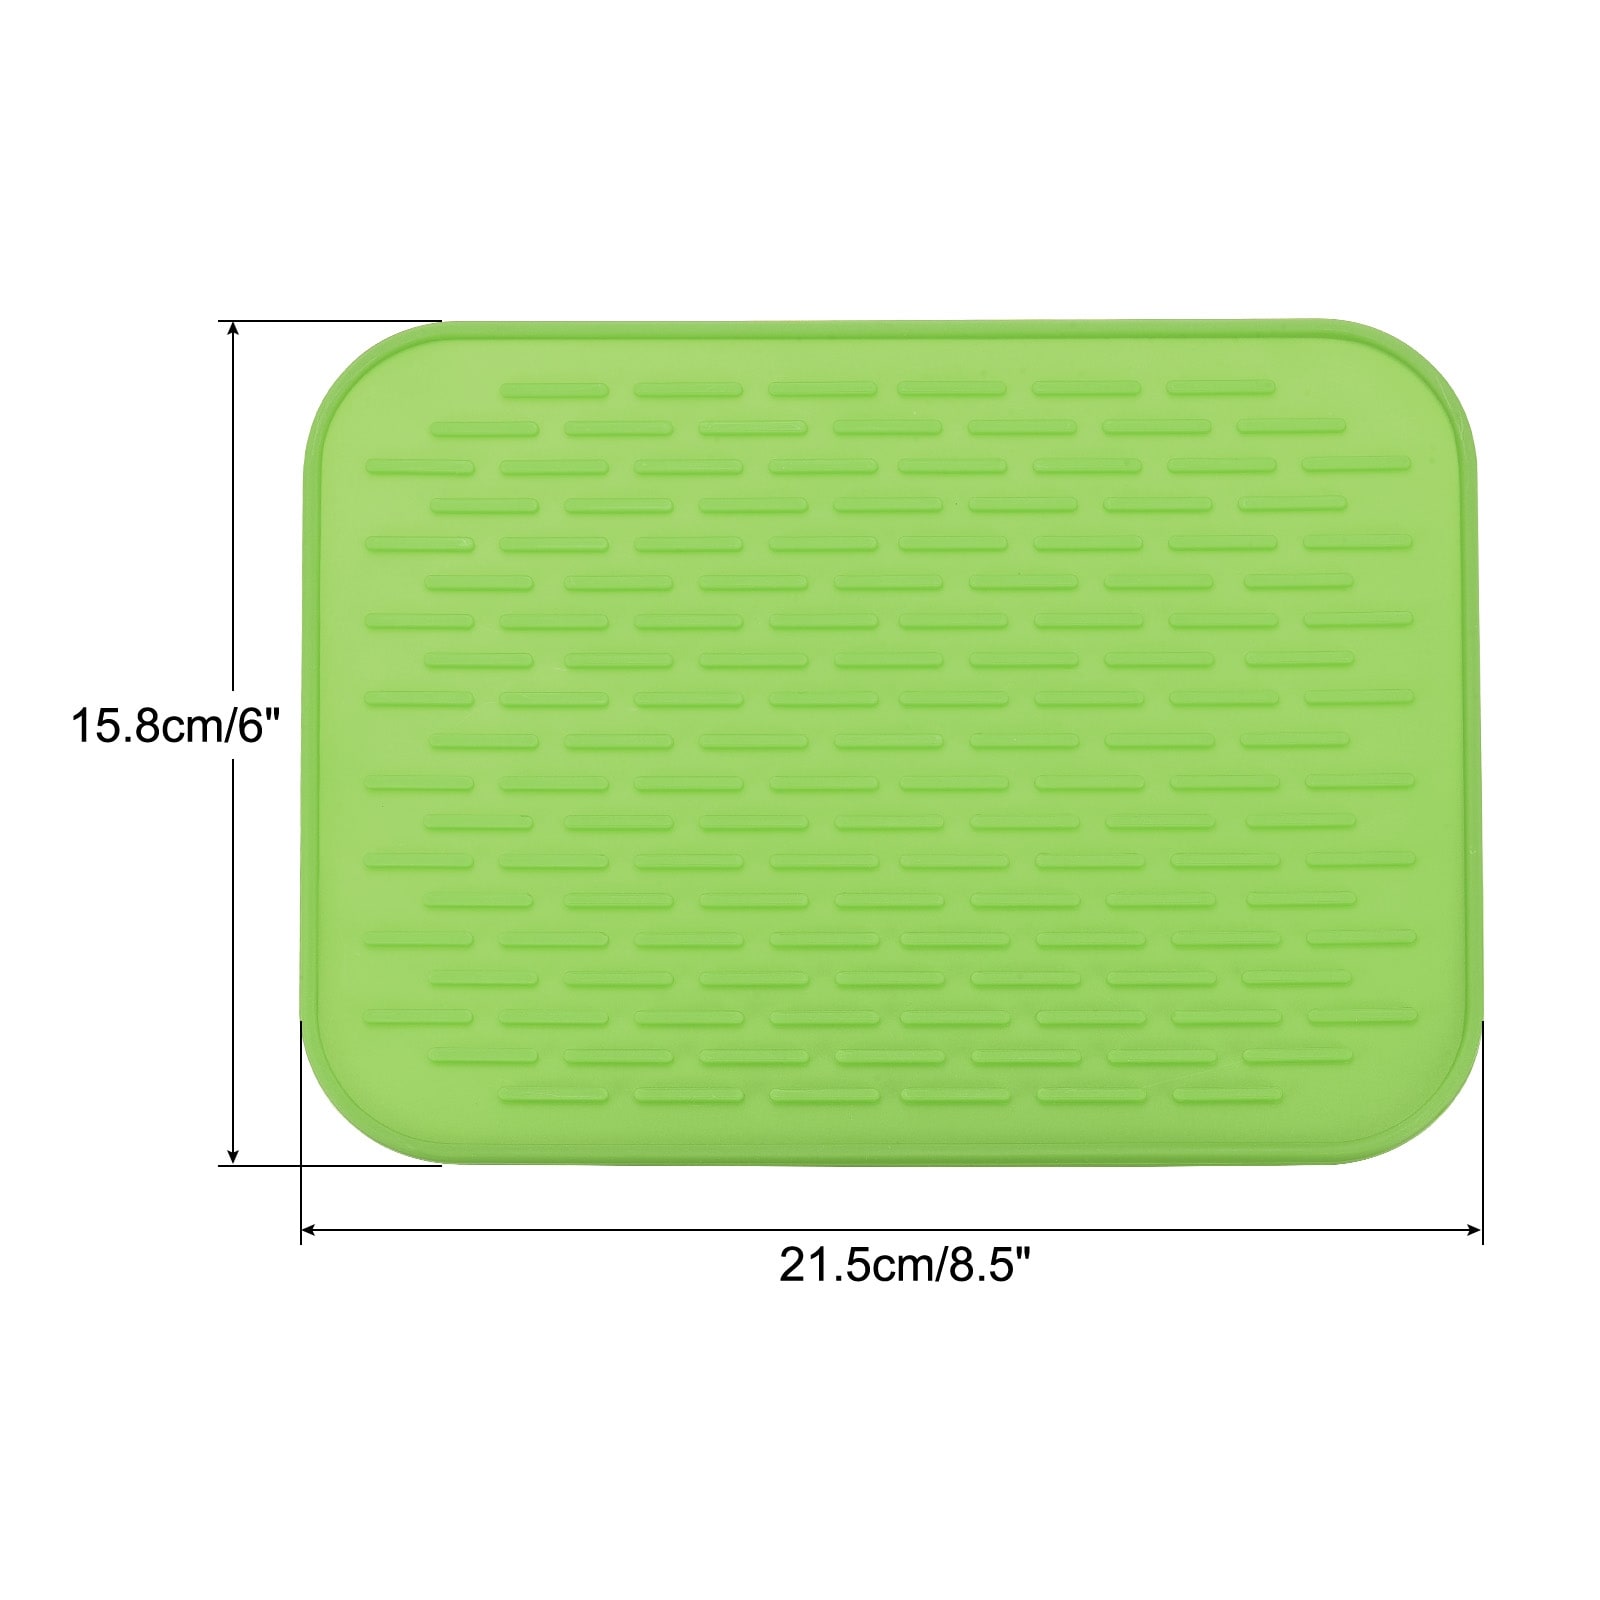 https://ak1.ostkcdn.com/images/products/is/images/direct/91ff9fbd697d218debcce542a4bfc3e0f5b9cd2c/Silicone-Dish-Drying-Mat%2C-Under-Sink-Drain-Pad-Heat-Resistant-Non-Slipping-Suitable-for-Kitchen-Counter%2C-Sink%2C-Fridge%2C-Drawer.jpg